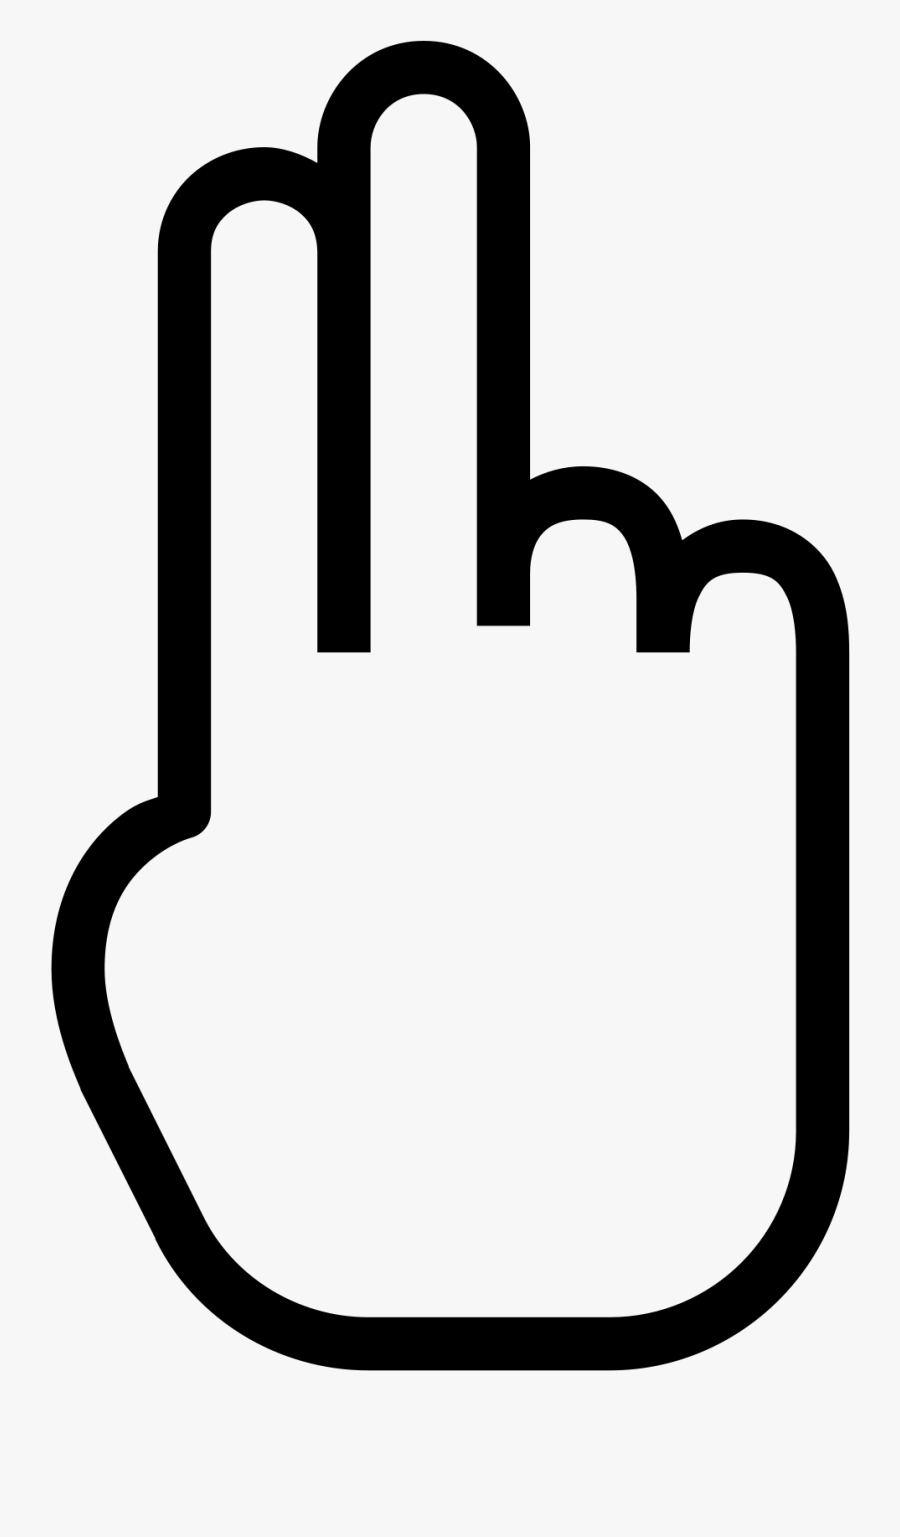 One Vector Pointer Finger - White Finger Icon Png, Transparent Clipart